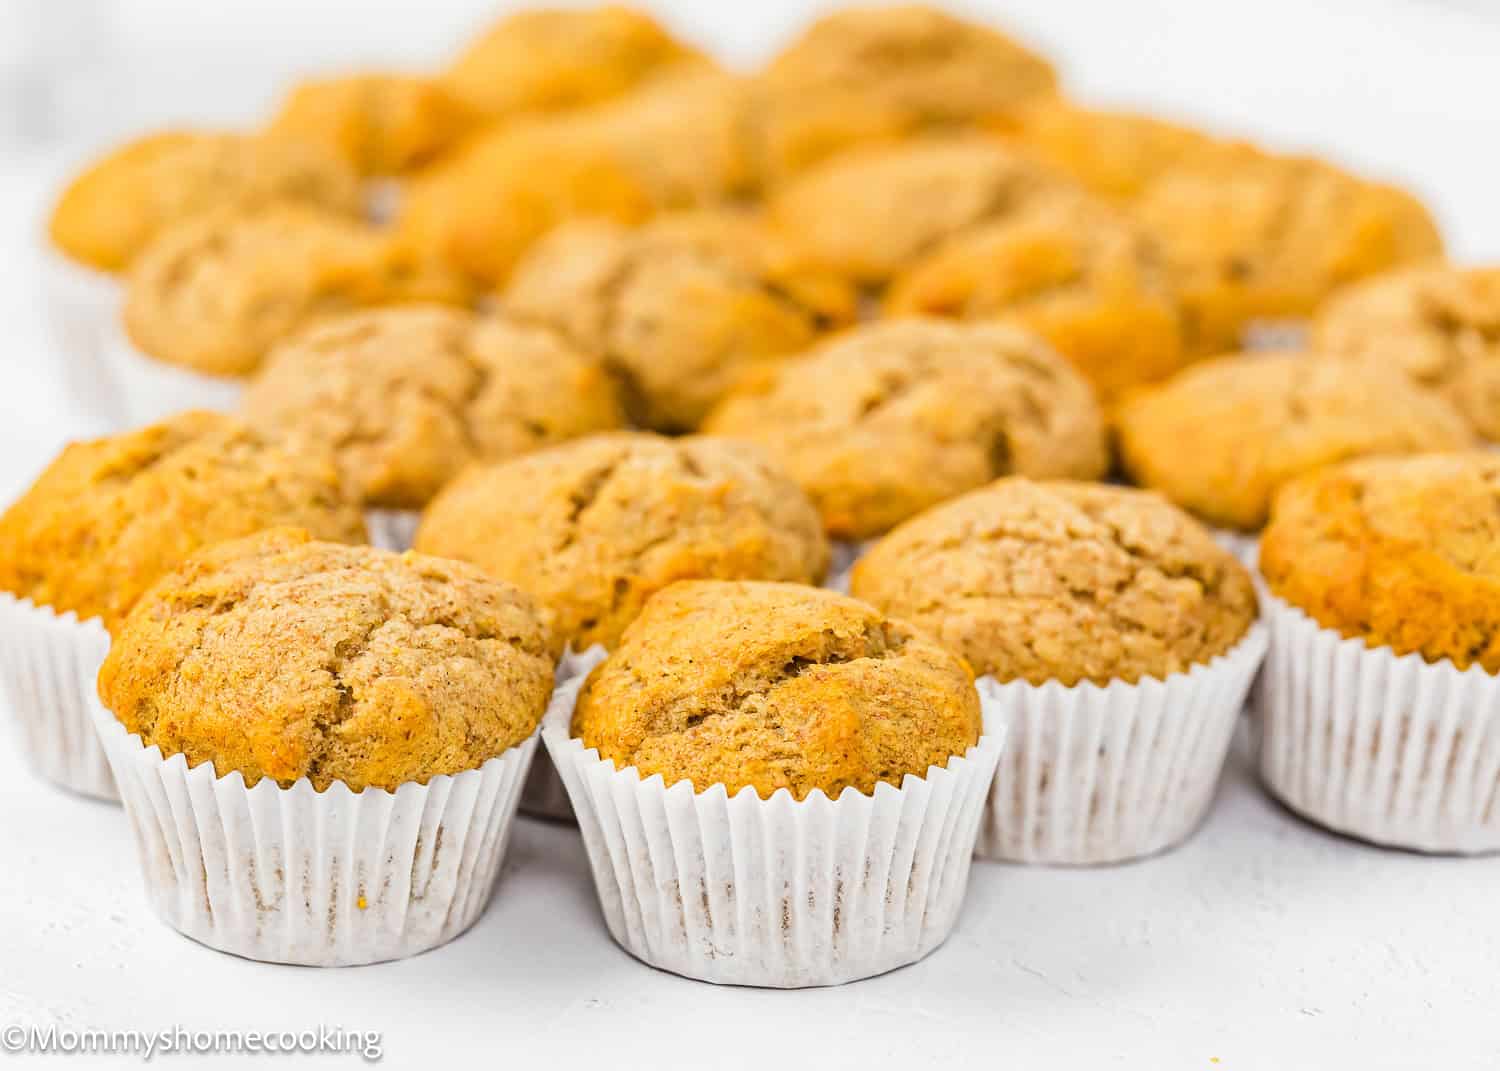 baked Healthy Mini Banana Muffins over a white surface.